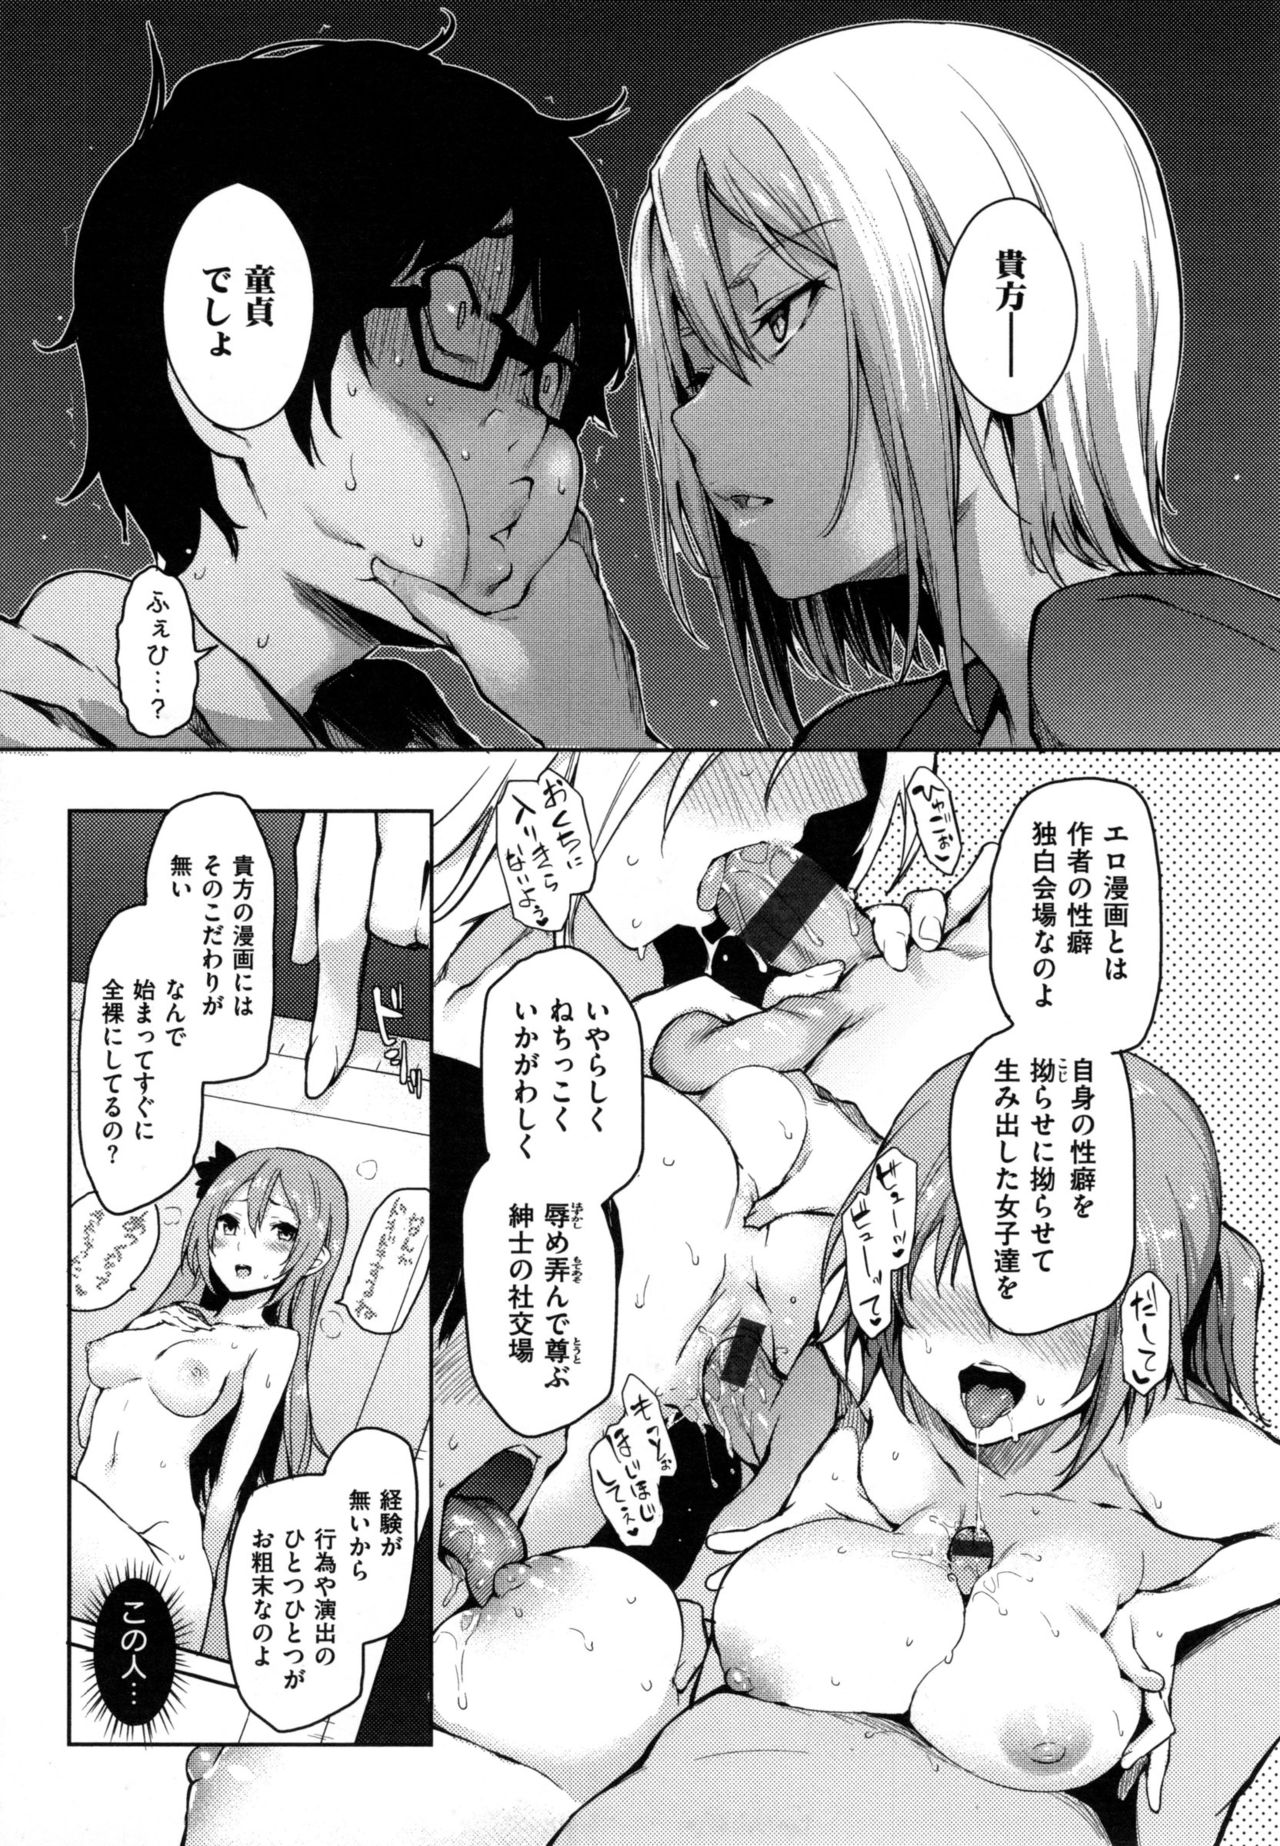 [Michiking] Shujuu Ecstasy - Sexual Relation of Master and Servant.  - page 34 full